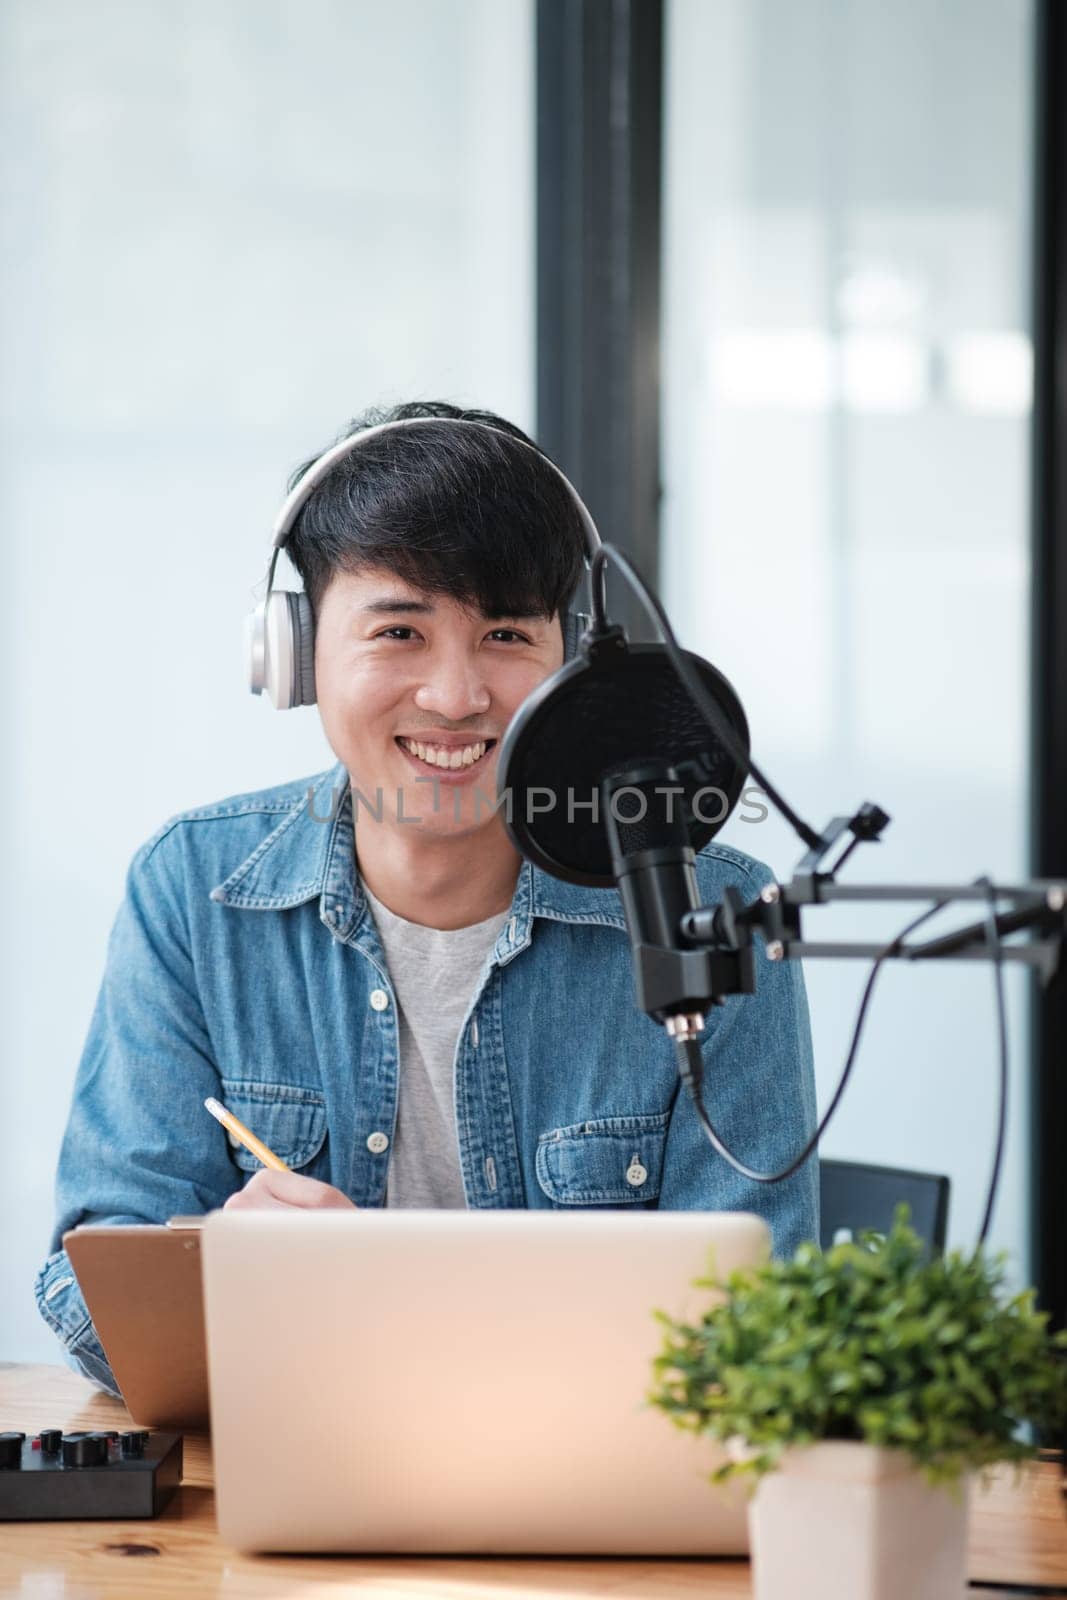 A man wearing headphones is sitting at a desk with a laptop and a plant by ijeab